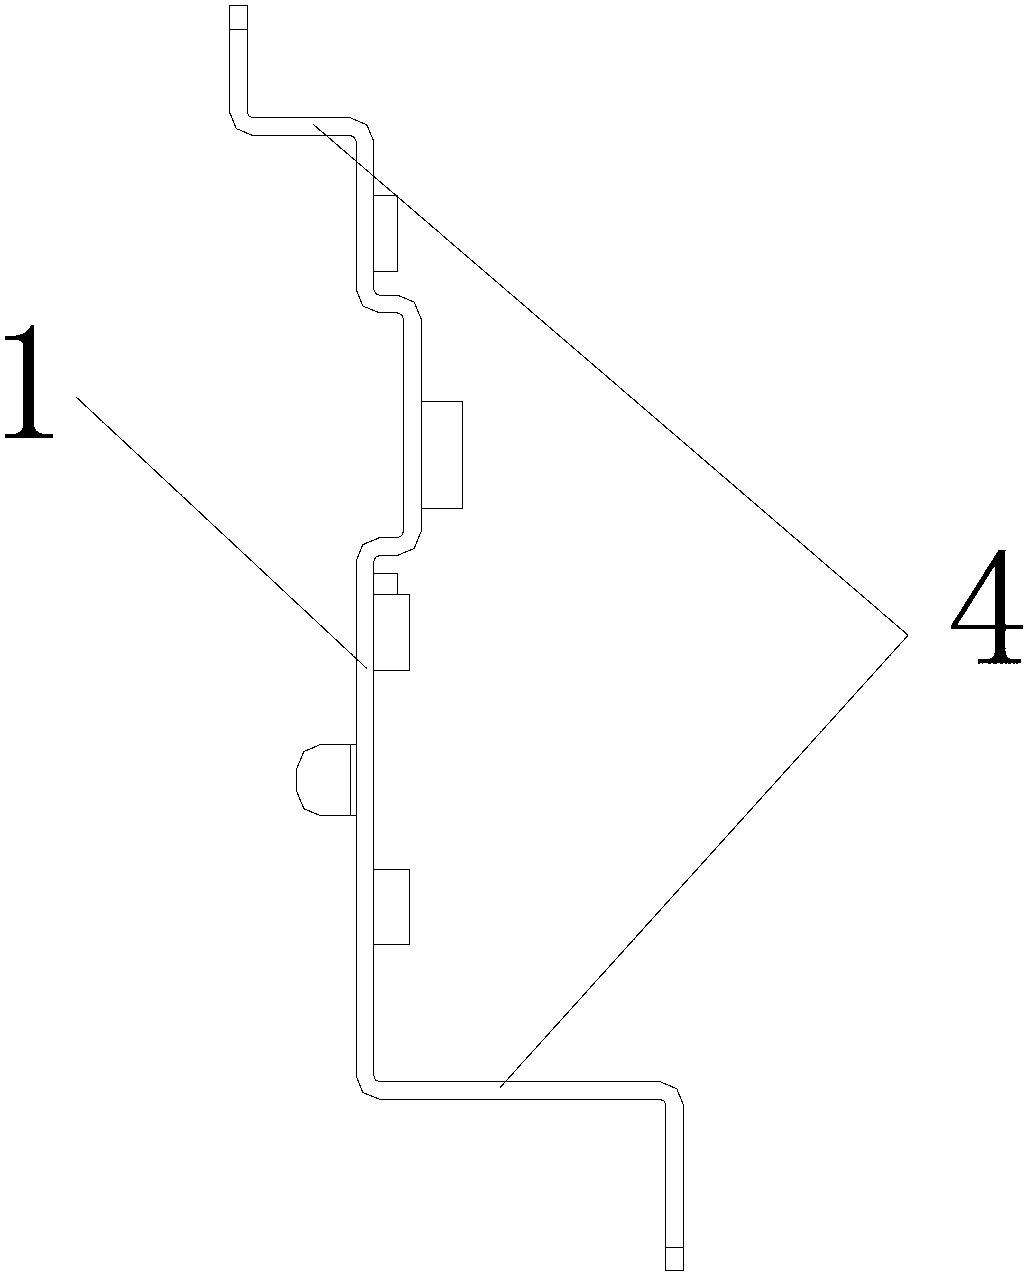 Lower connecting piece